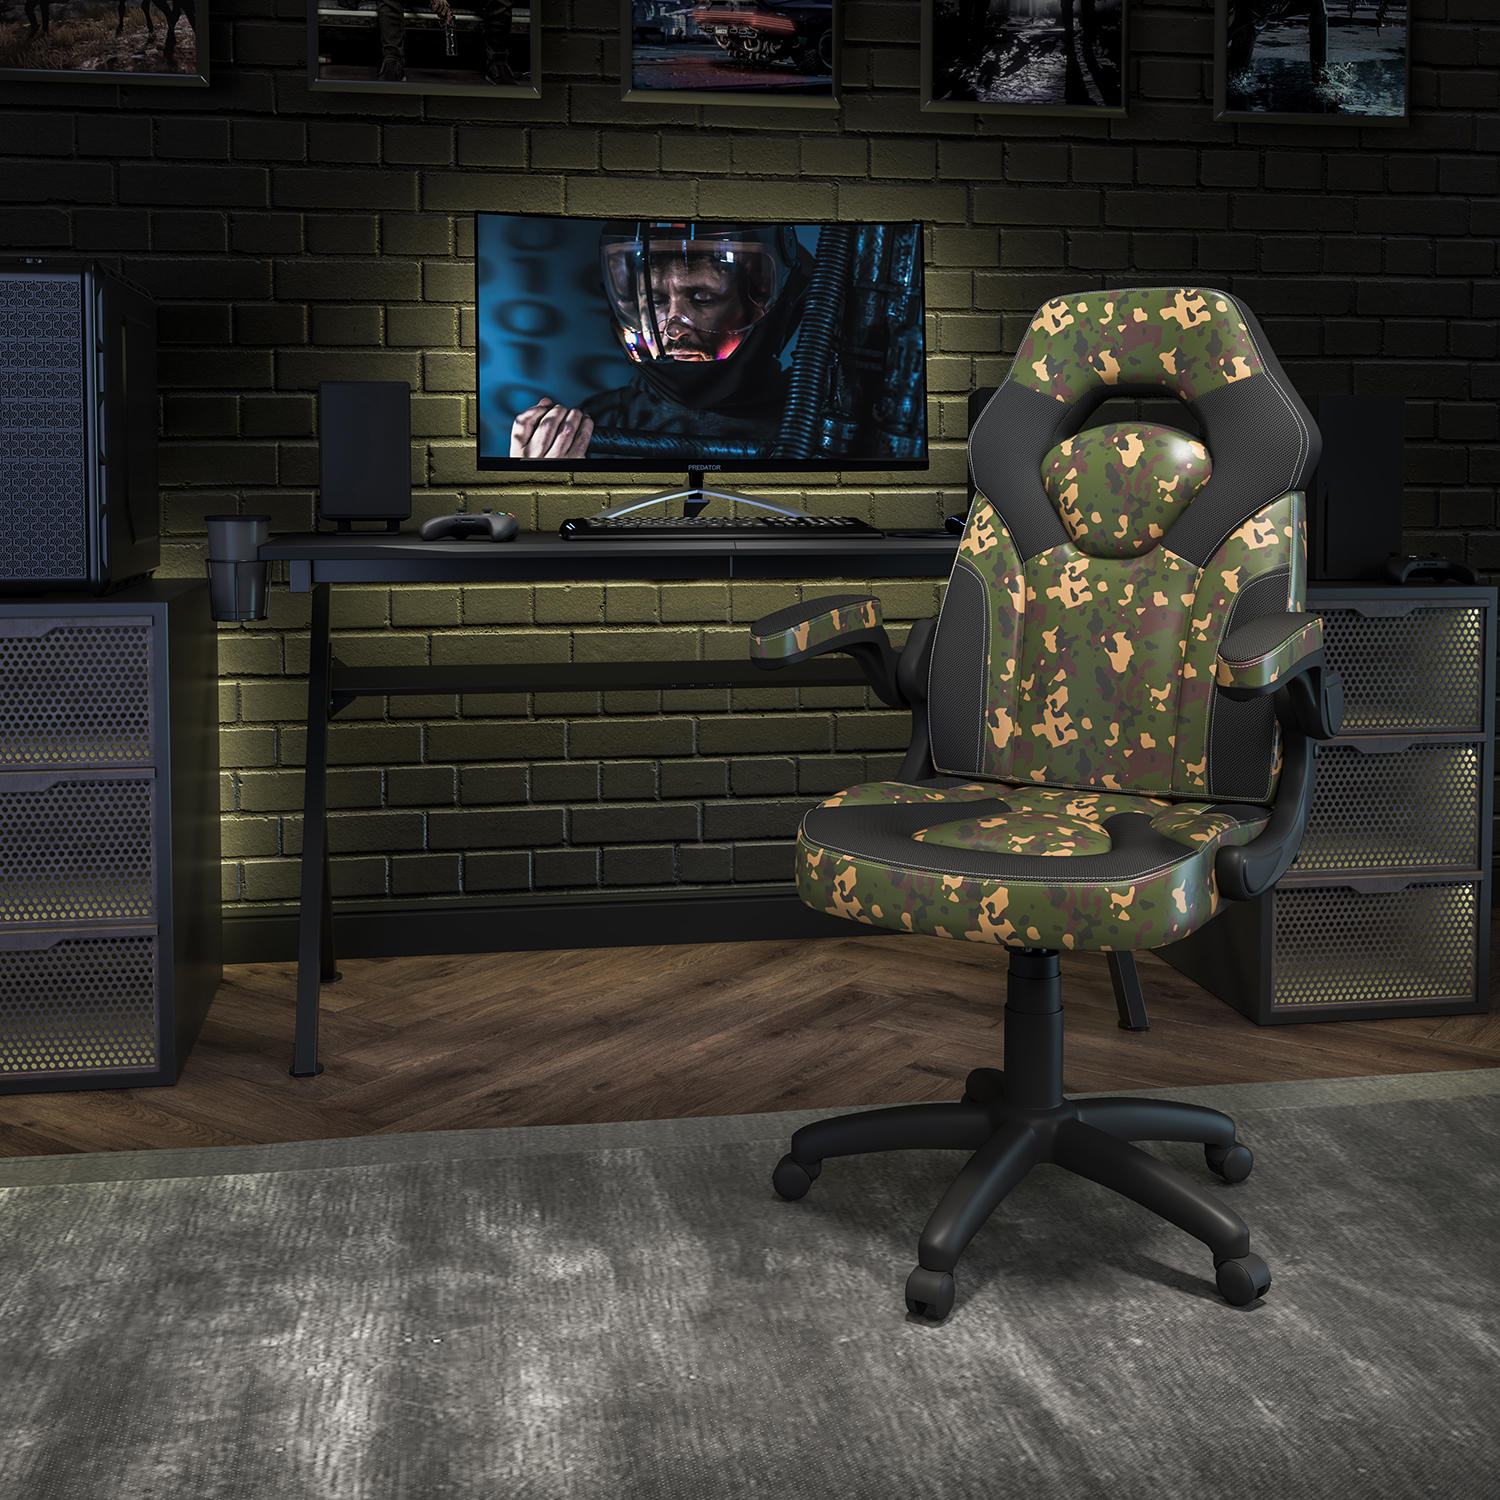 X10 Gaming Chair Racing Office Ergonomic Computer PC Adjustable Swivel Chair with Flip-up Arms, Camouflage/Black